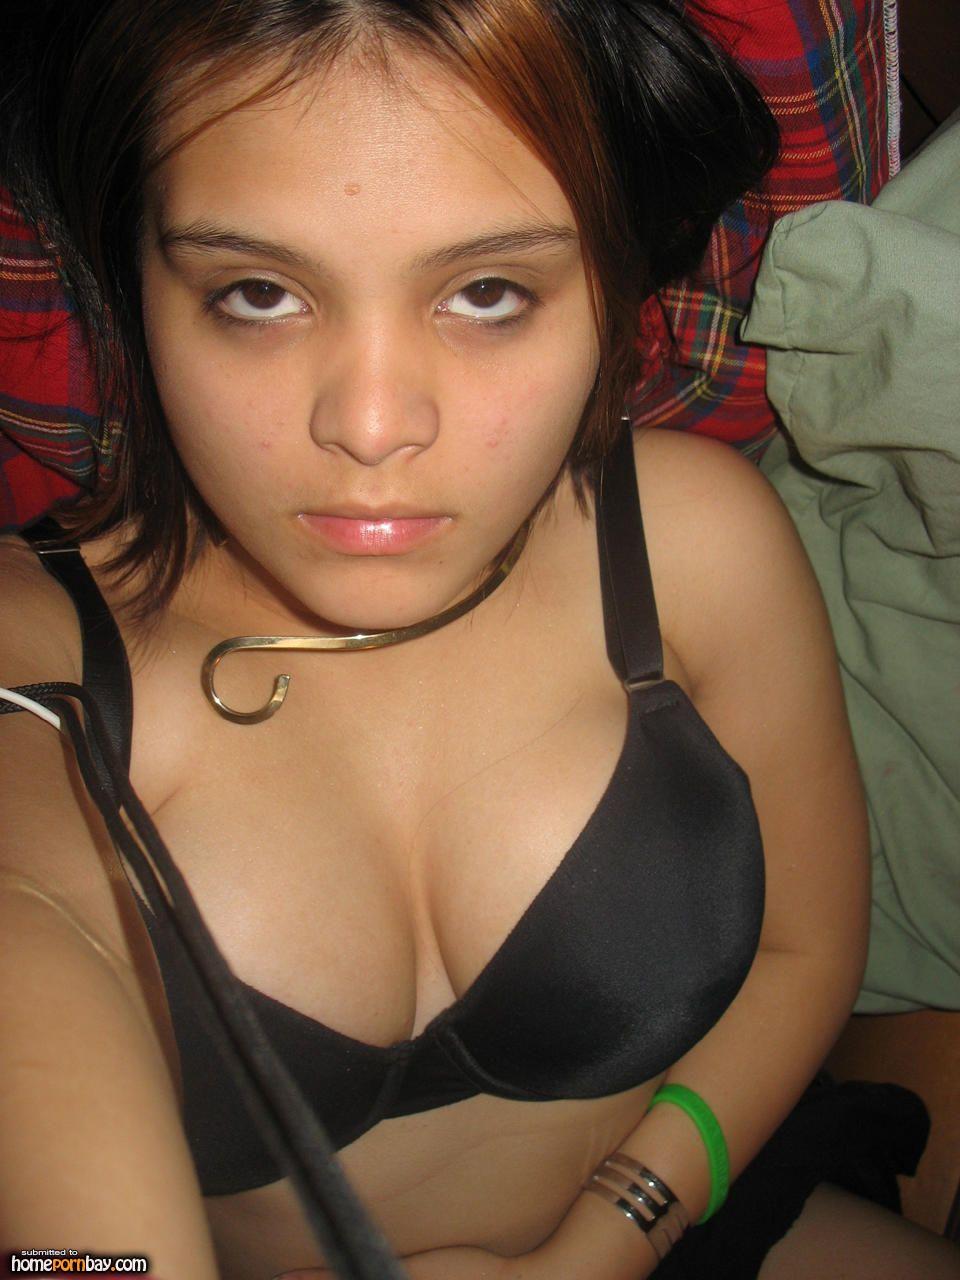 hotes girl naked fat one mexican